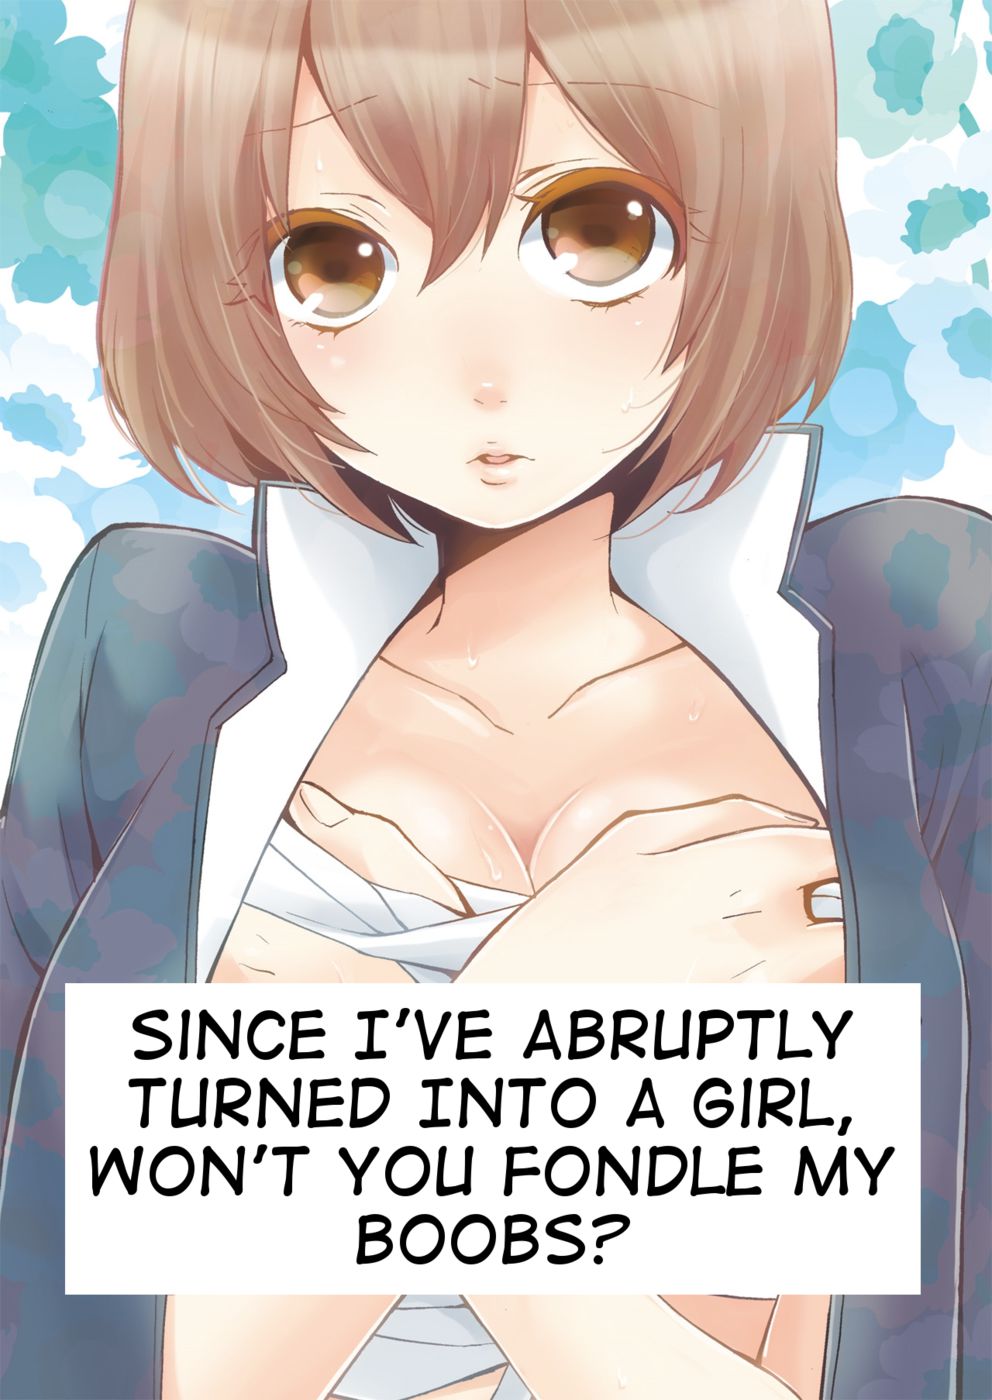 Hentai Manga Comic-Since I've Abruptly Turned Into a Girl, Won't You Fondle My Boobs?-Chapter 1-1